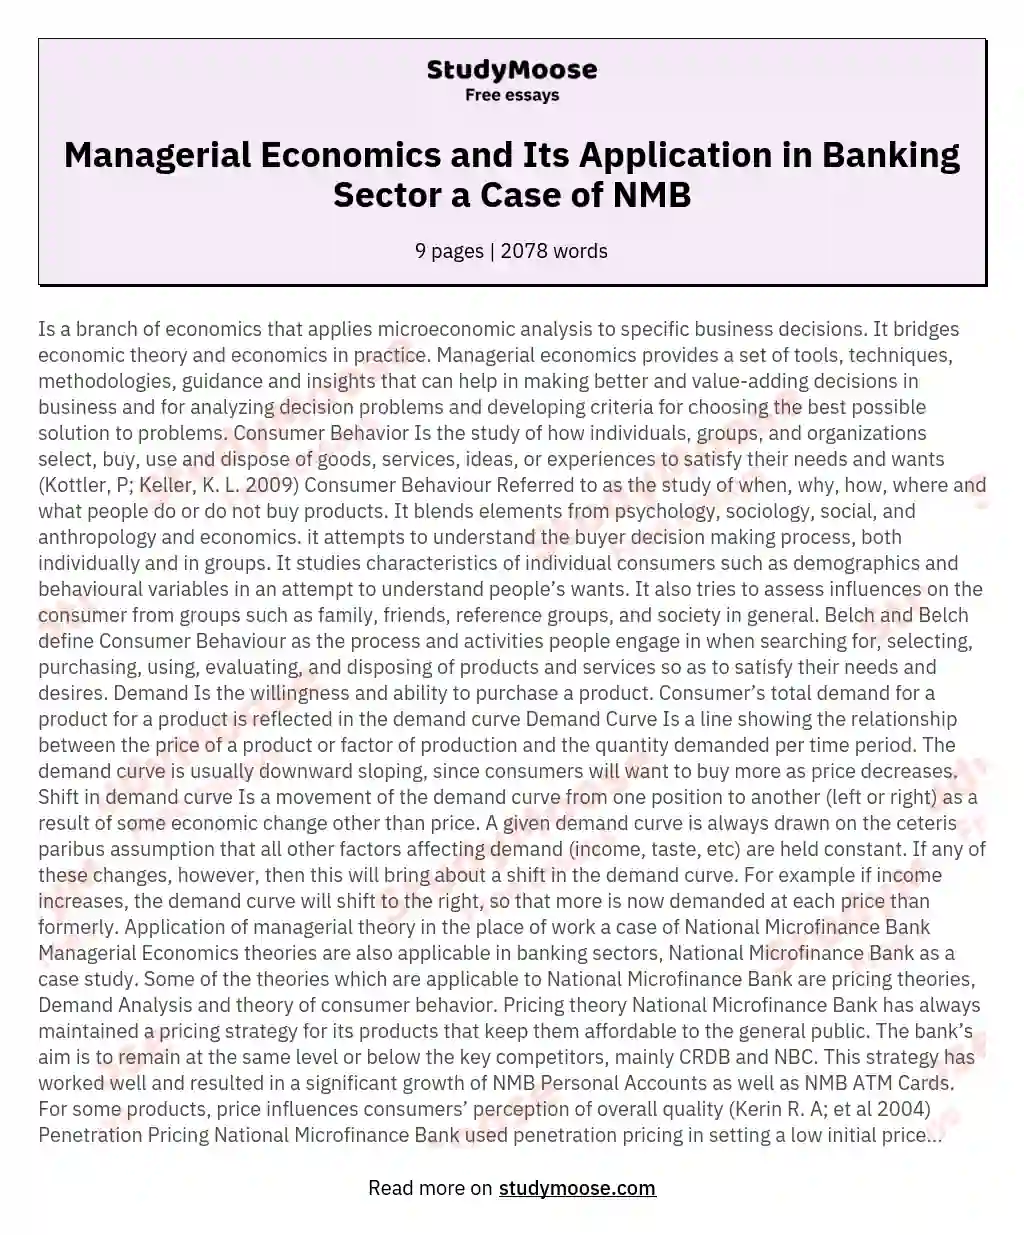 Managerial Economics and Its Application in Banking Sector a Case of NMB essay